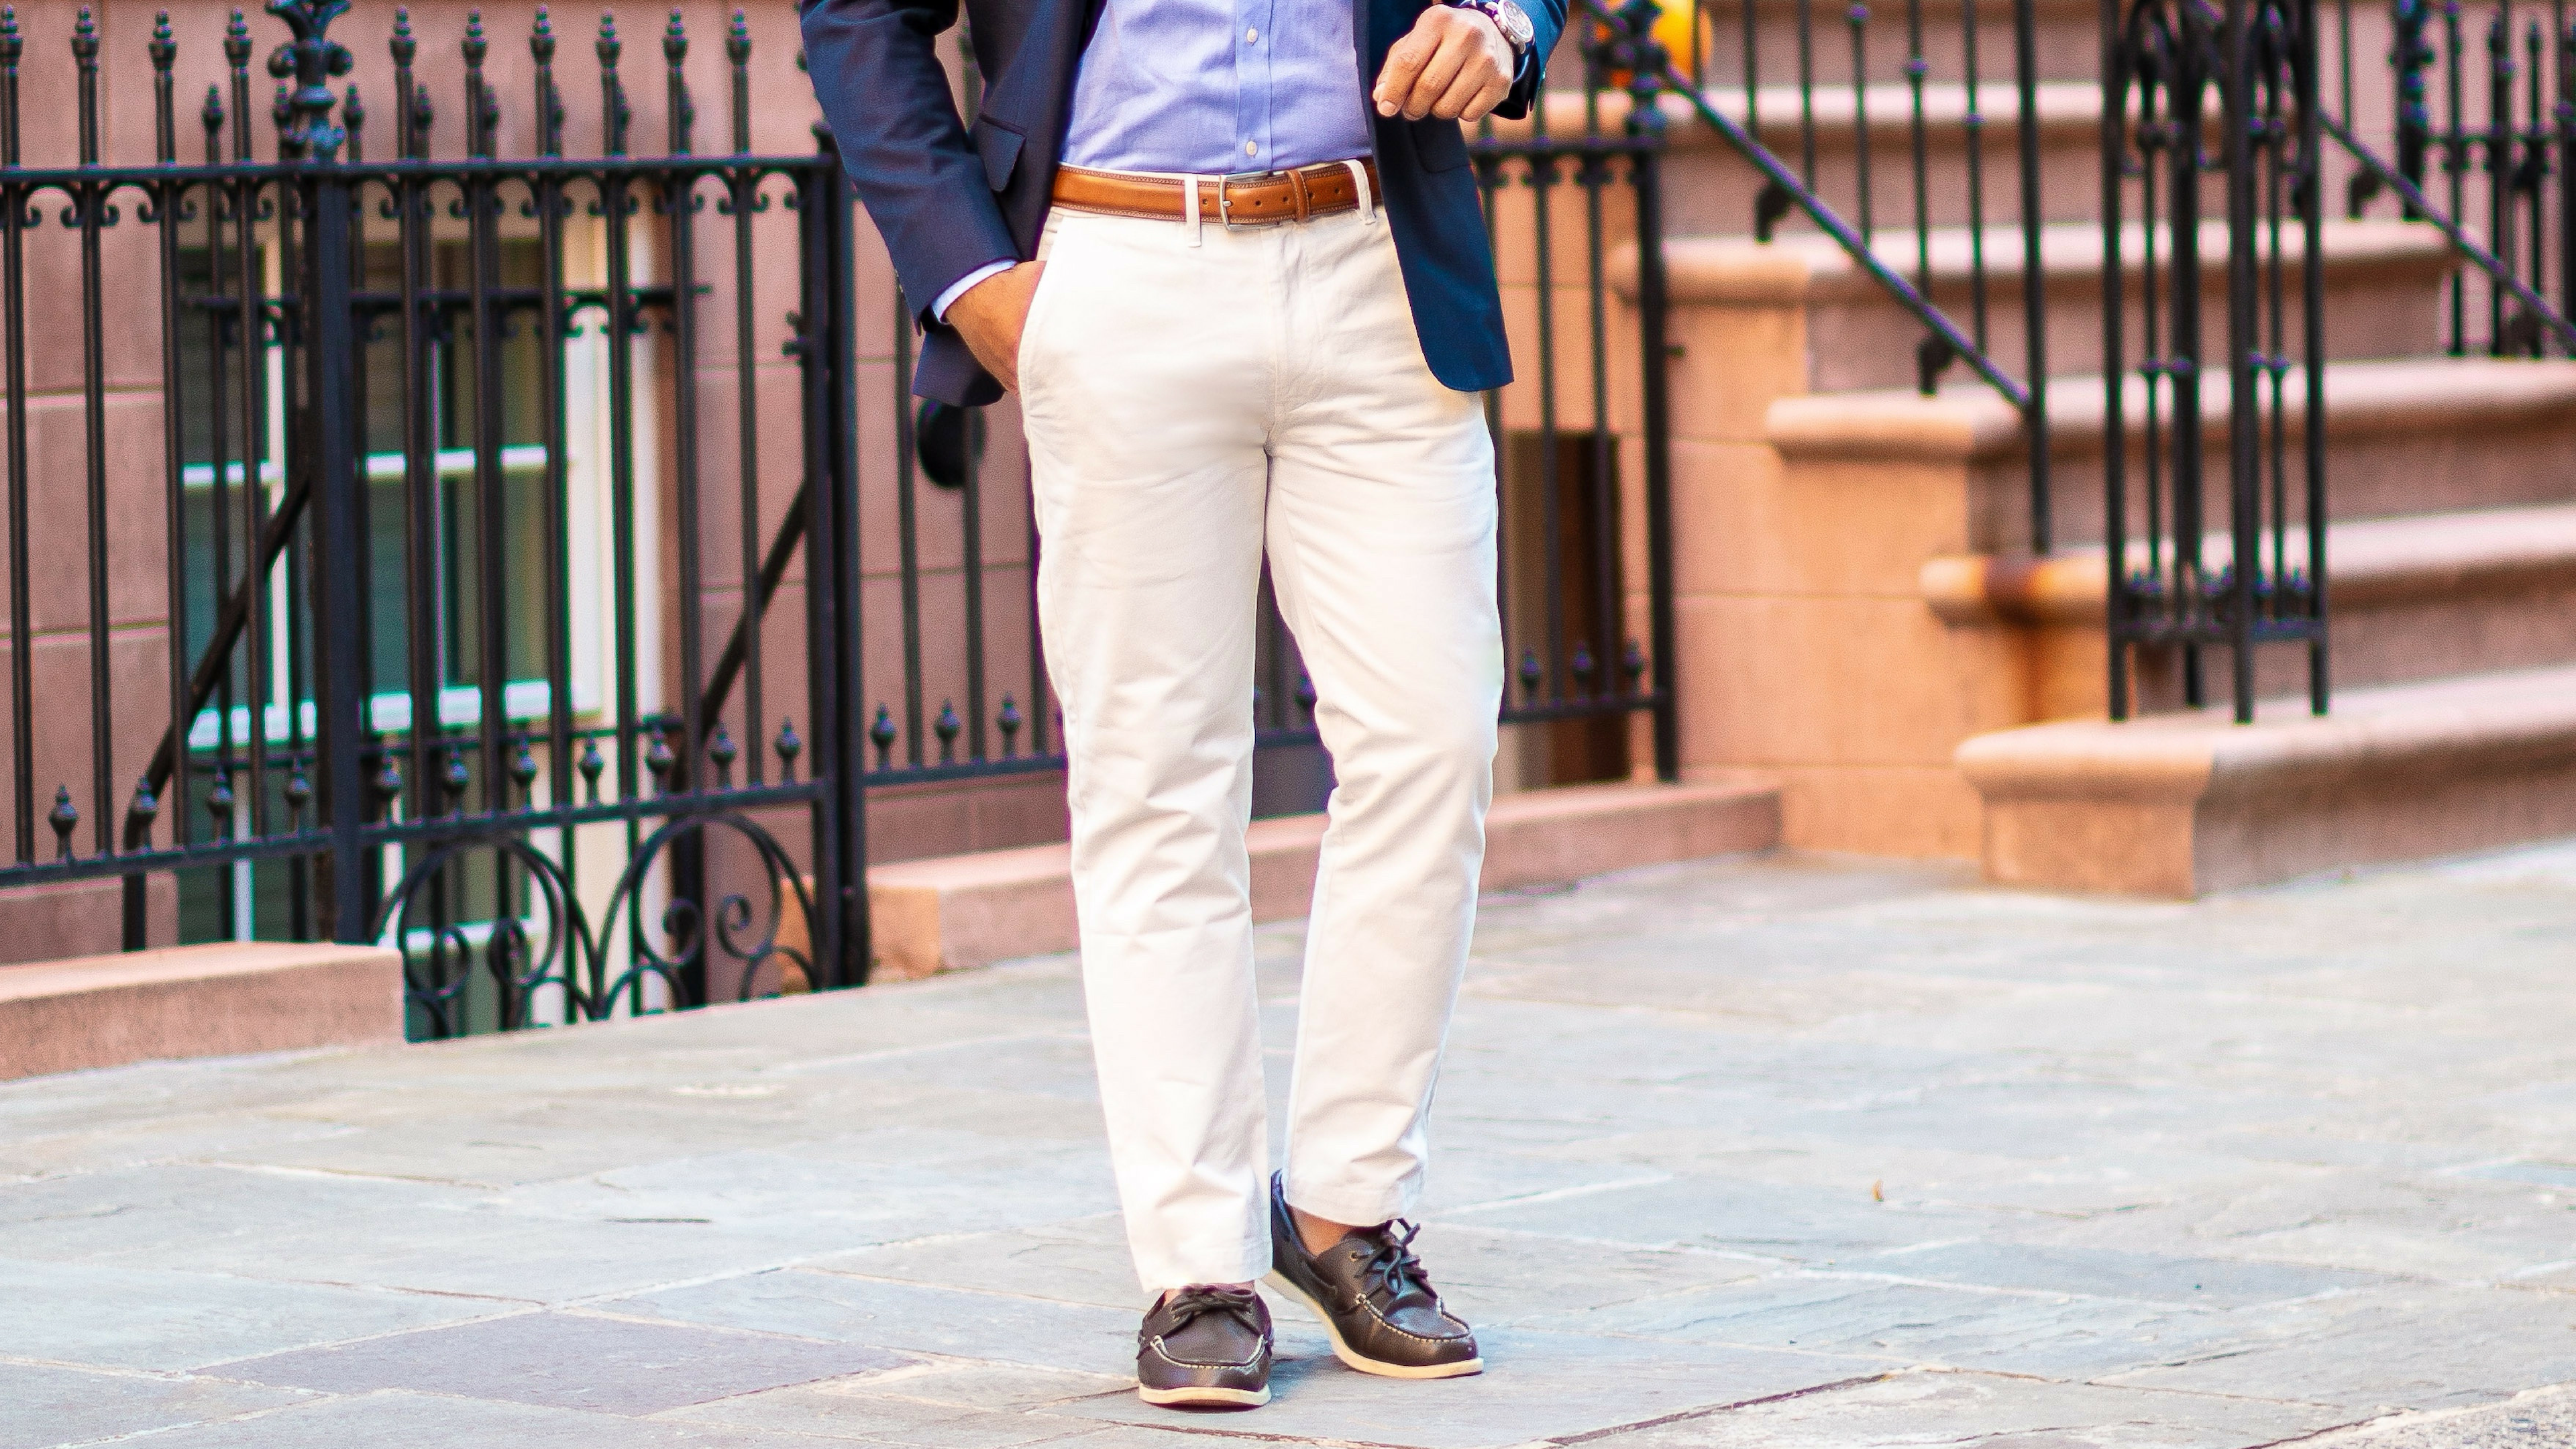 Navy Vertical Striped Blazer with White Pants Outfits For Men (31 ideas &  outfits) | Lookastic